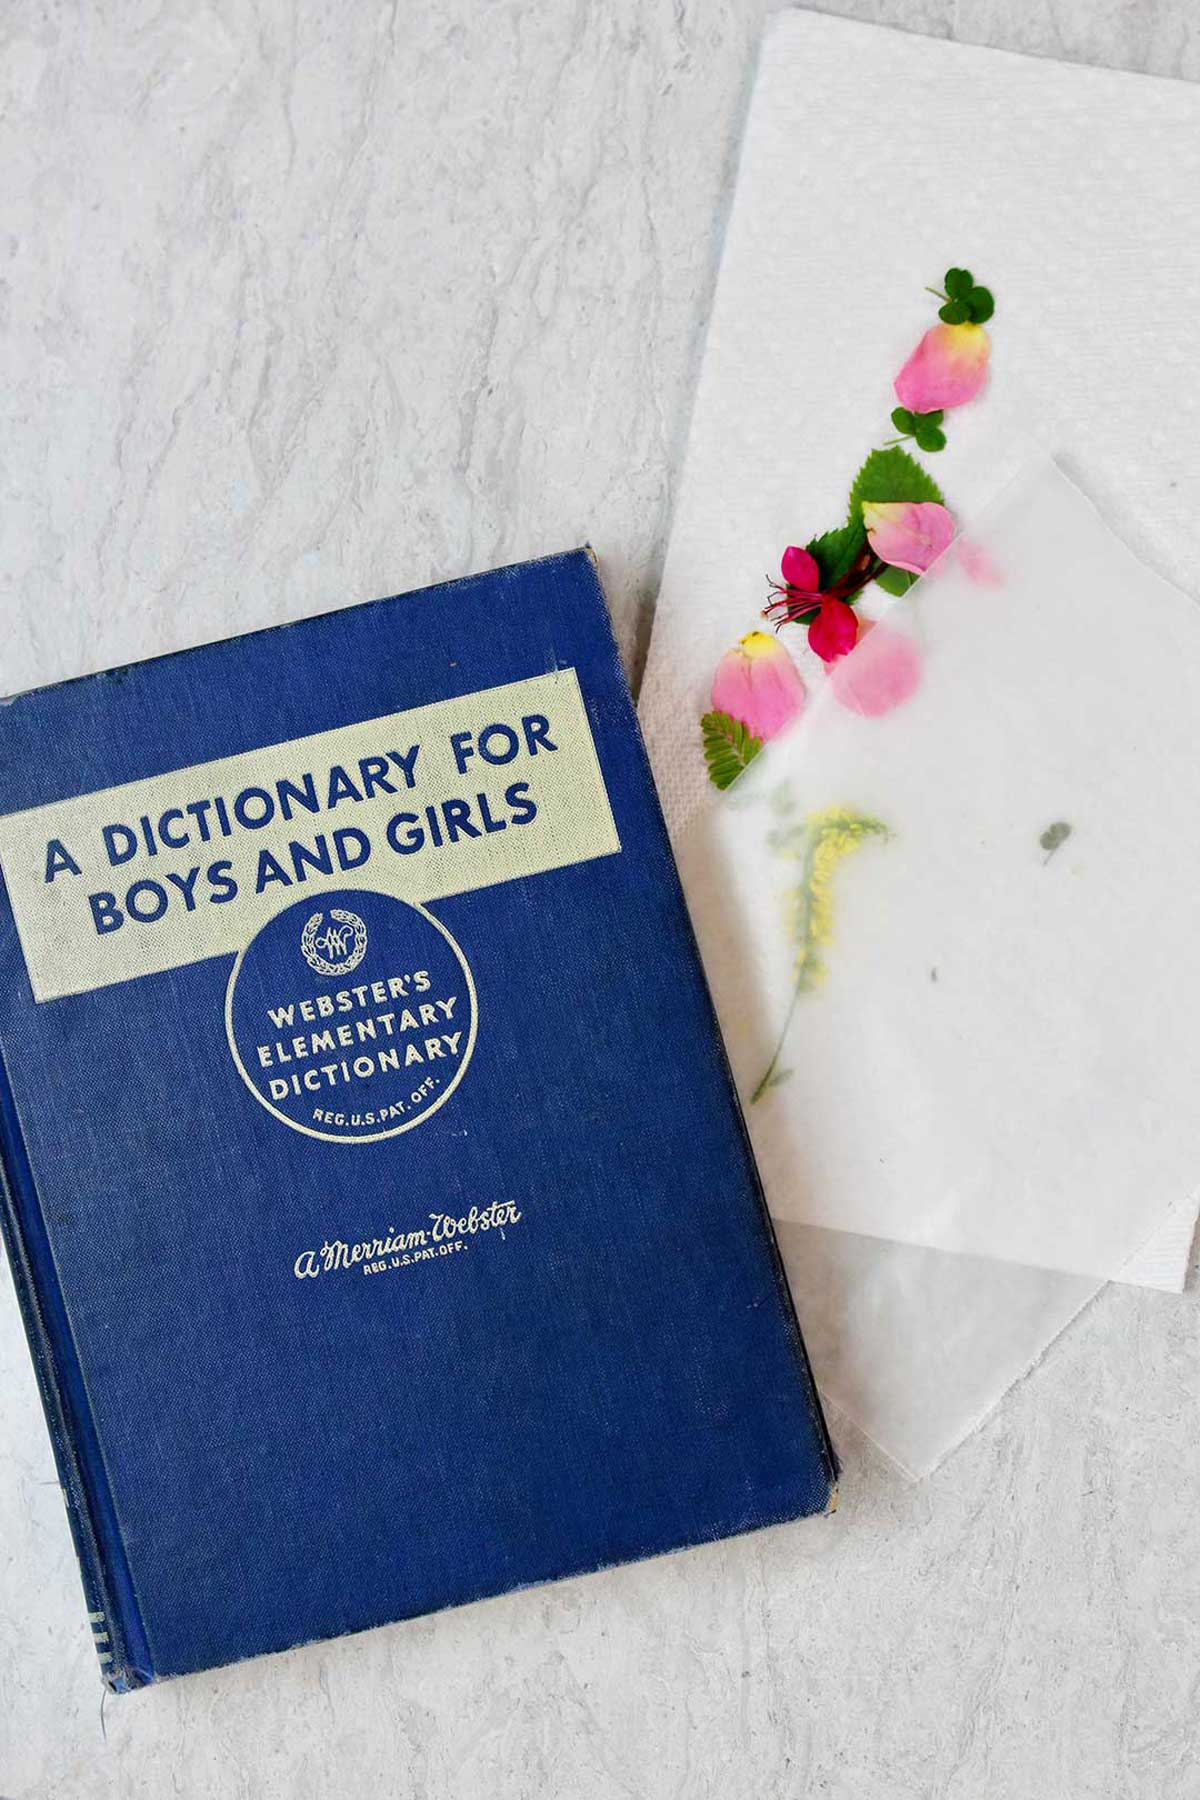 A Blue dictionary sits near a piece of wax paper, a paper towel and some flower petals and leaves.